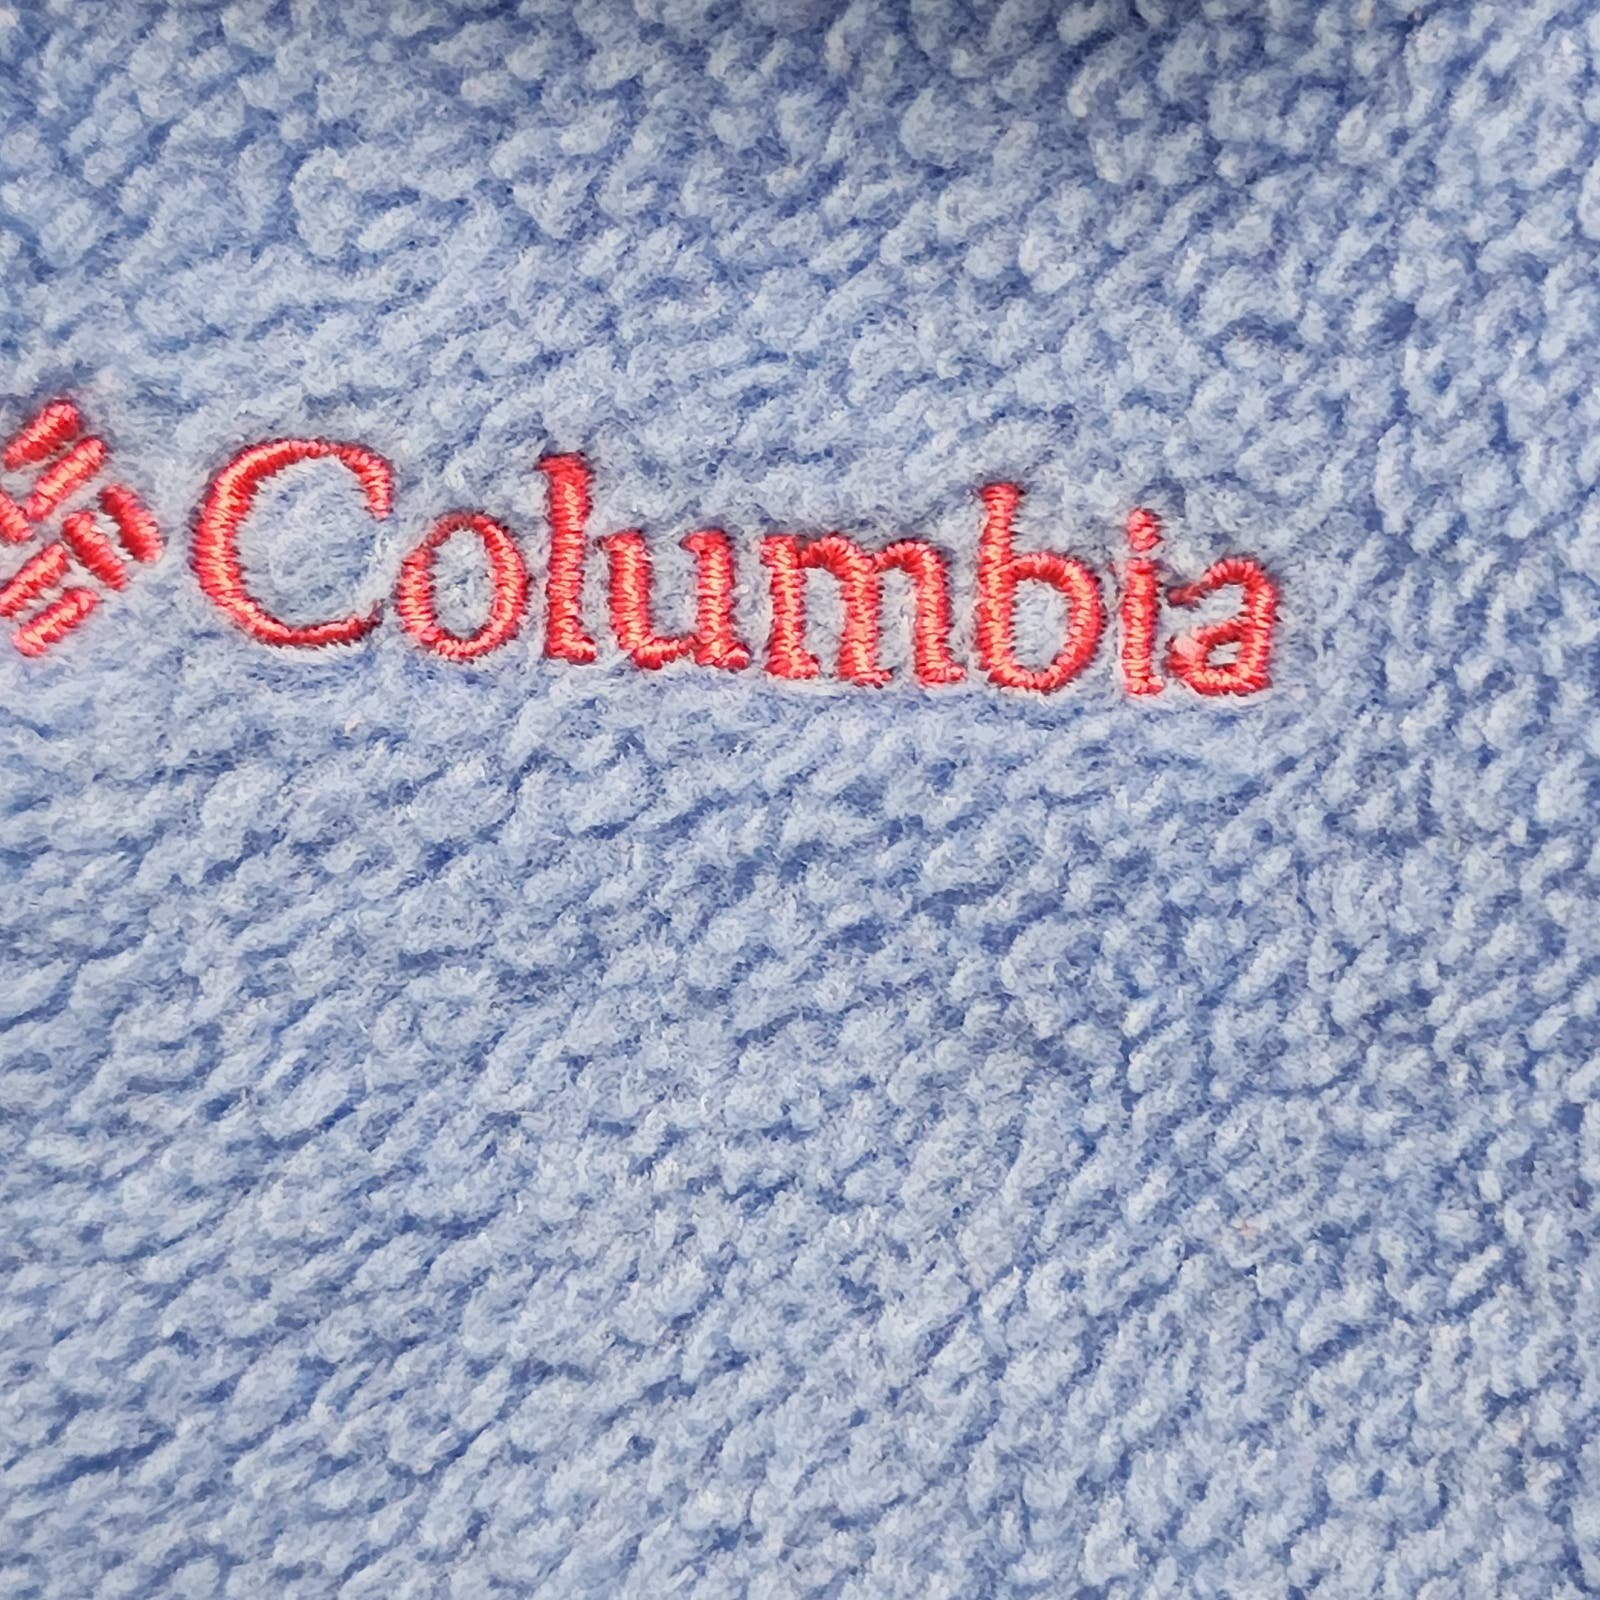 Special offer  Columbia Polar Fleece Jacket Womens 14/16 Blue Full Zip Up Gorpcore Outdoors ppuH38USn all for you